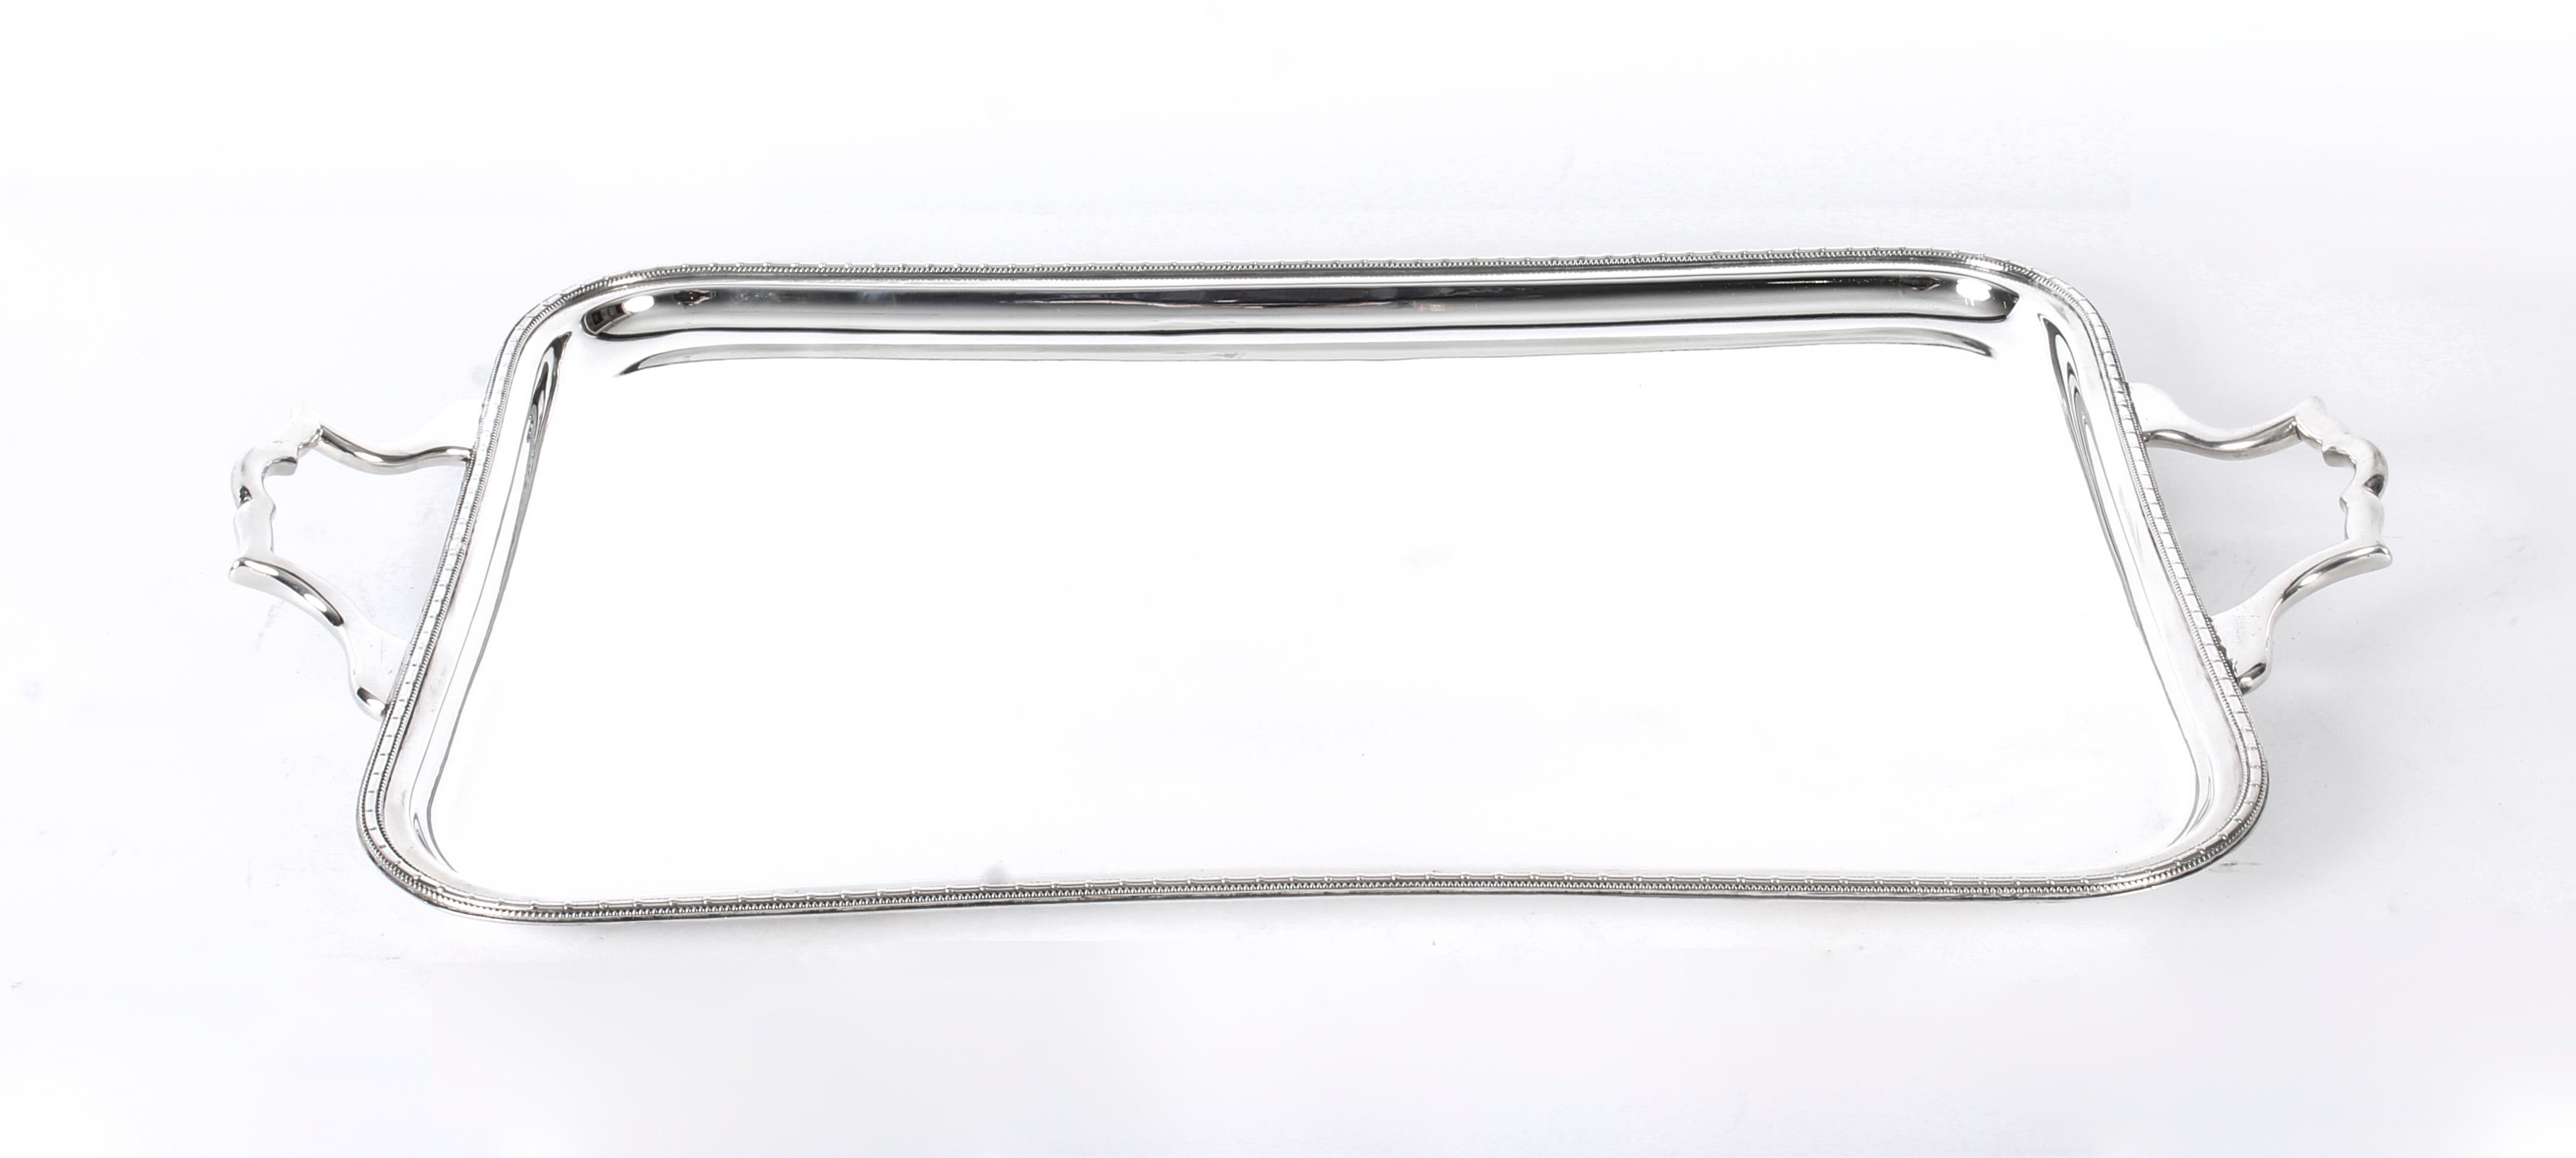 This is a lovely large antique English Art Deco silver plated butlers tray, circa 1930 in date and bearing the crossed swords makers mark.

This large rectangular silver plated tray features a slight central incline with a medium inset decorative